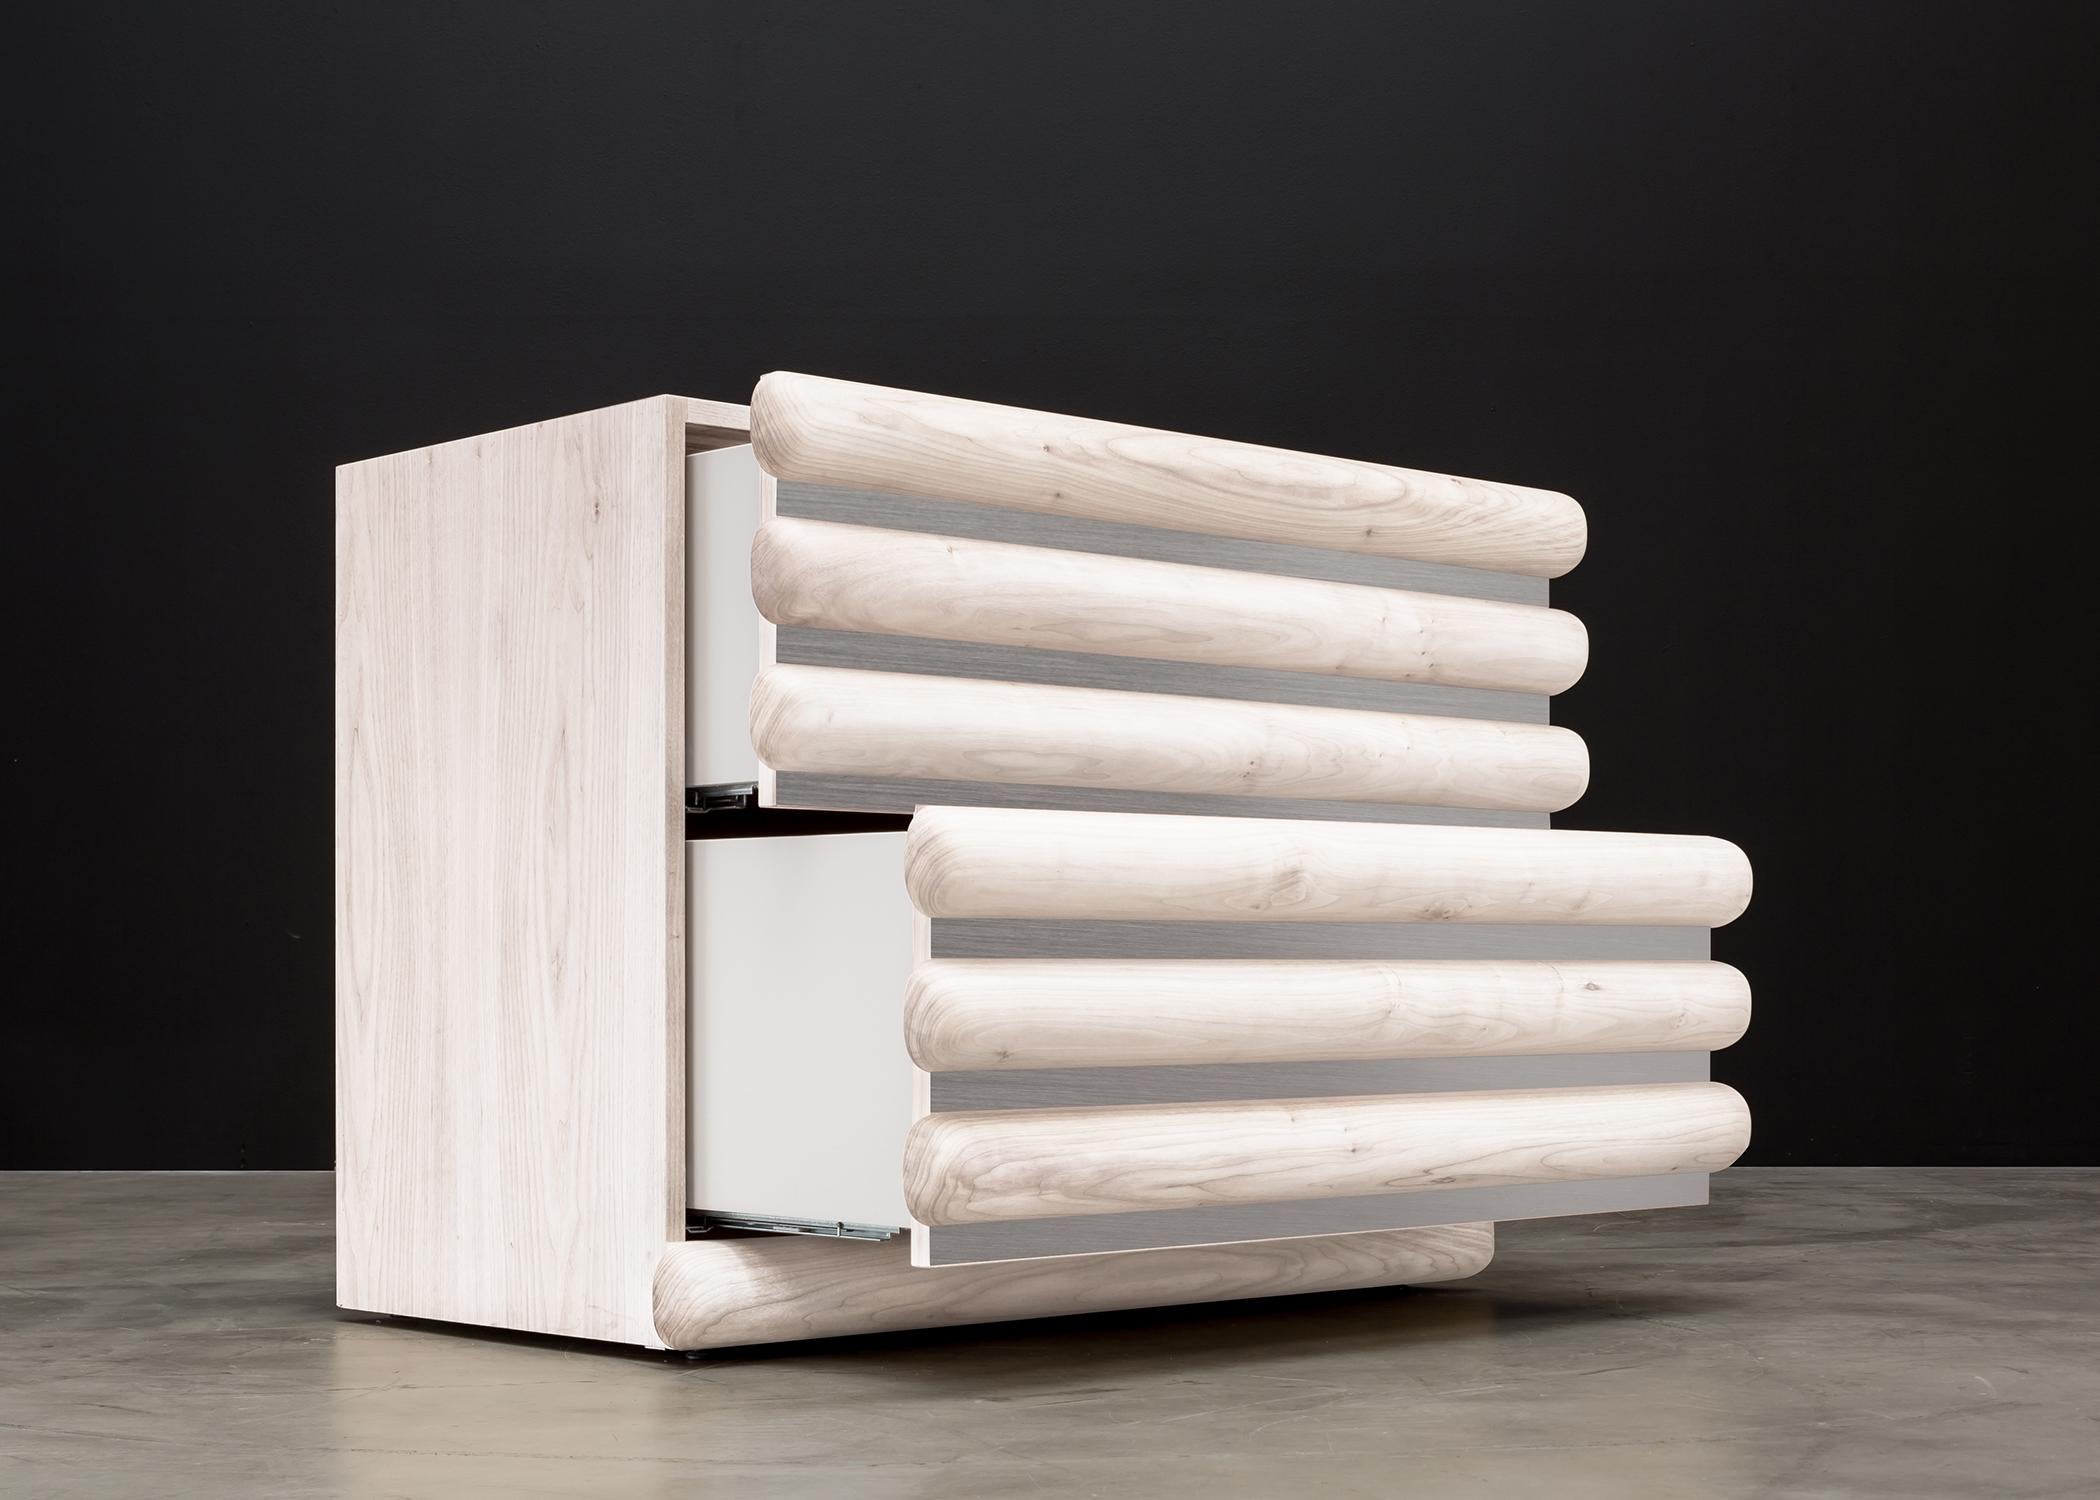 STACKED NIGHTSTAND - Modern Bleached White Oak with Smoked Chrome

The Stacked Nightstand is a beautifully crafted piece of modern furniture that combines functionality and style. It features a bleached white oak body with a sleek and sophisticated